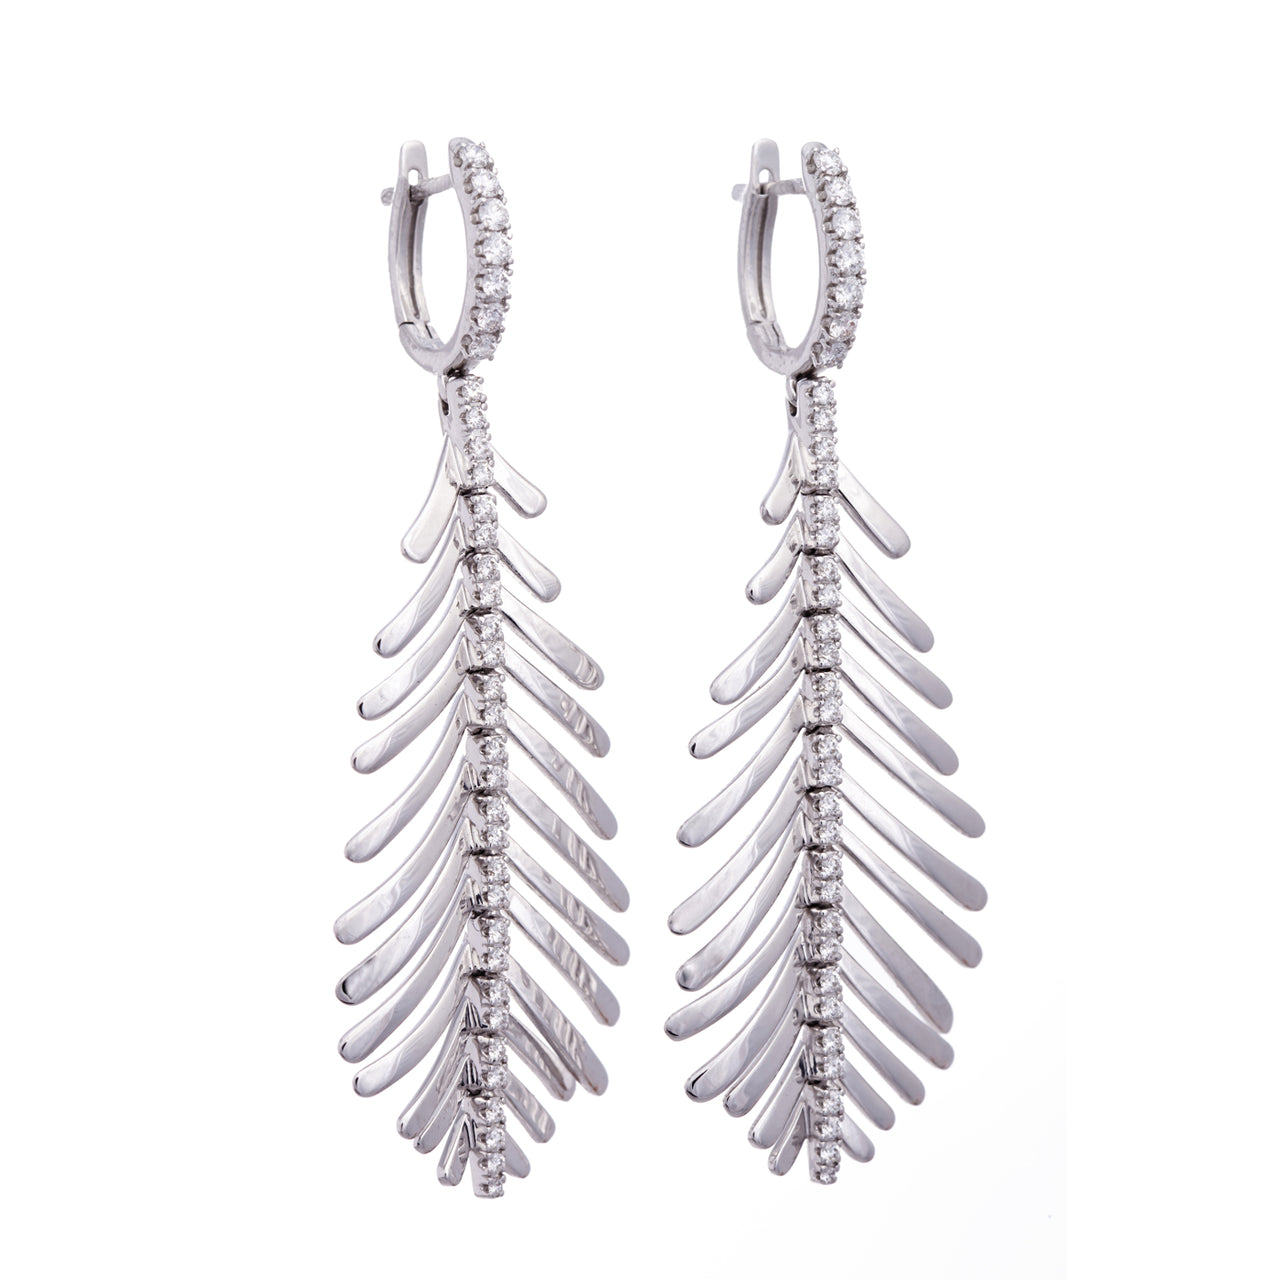 Plume Earrings with Diamond Spine